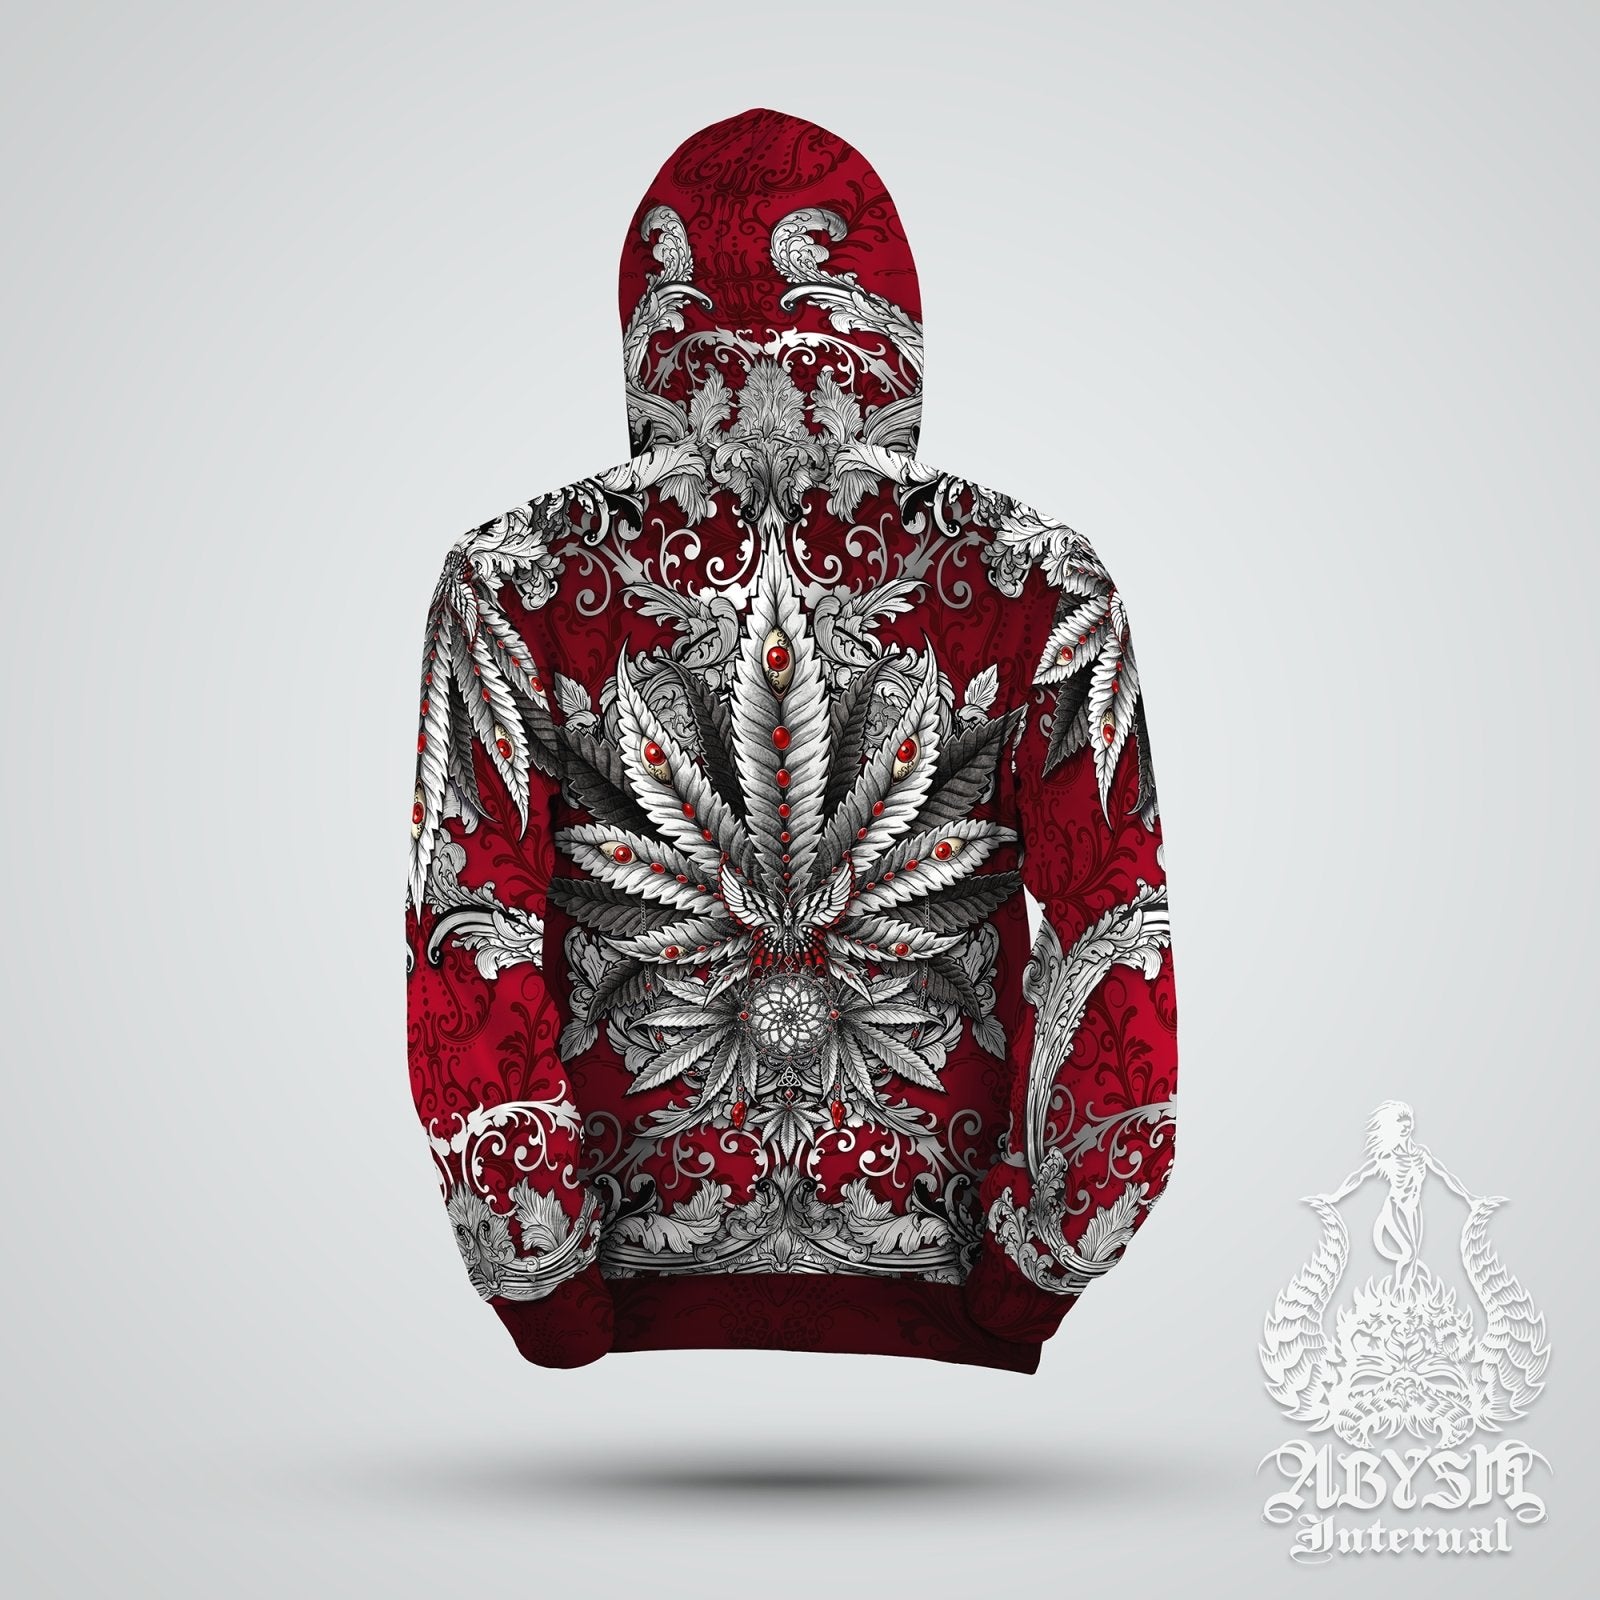 Cannabis Hoodie, Weed Clothes, Indie Festival Outfit, Trippy Streetwear, Hippie and Alternative Clothing, Unisex, 420 Gift - Silver Marijuana - Abysm Internal